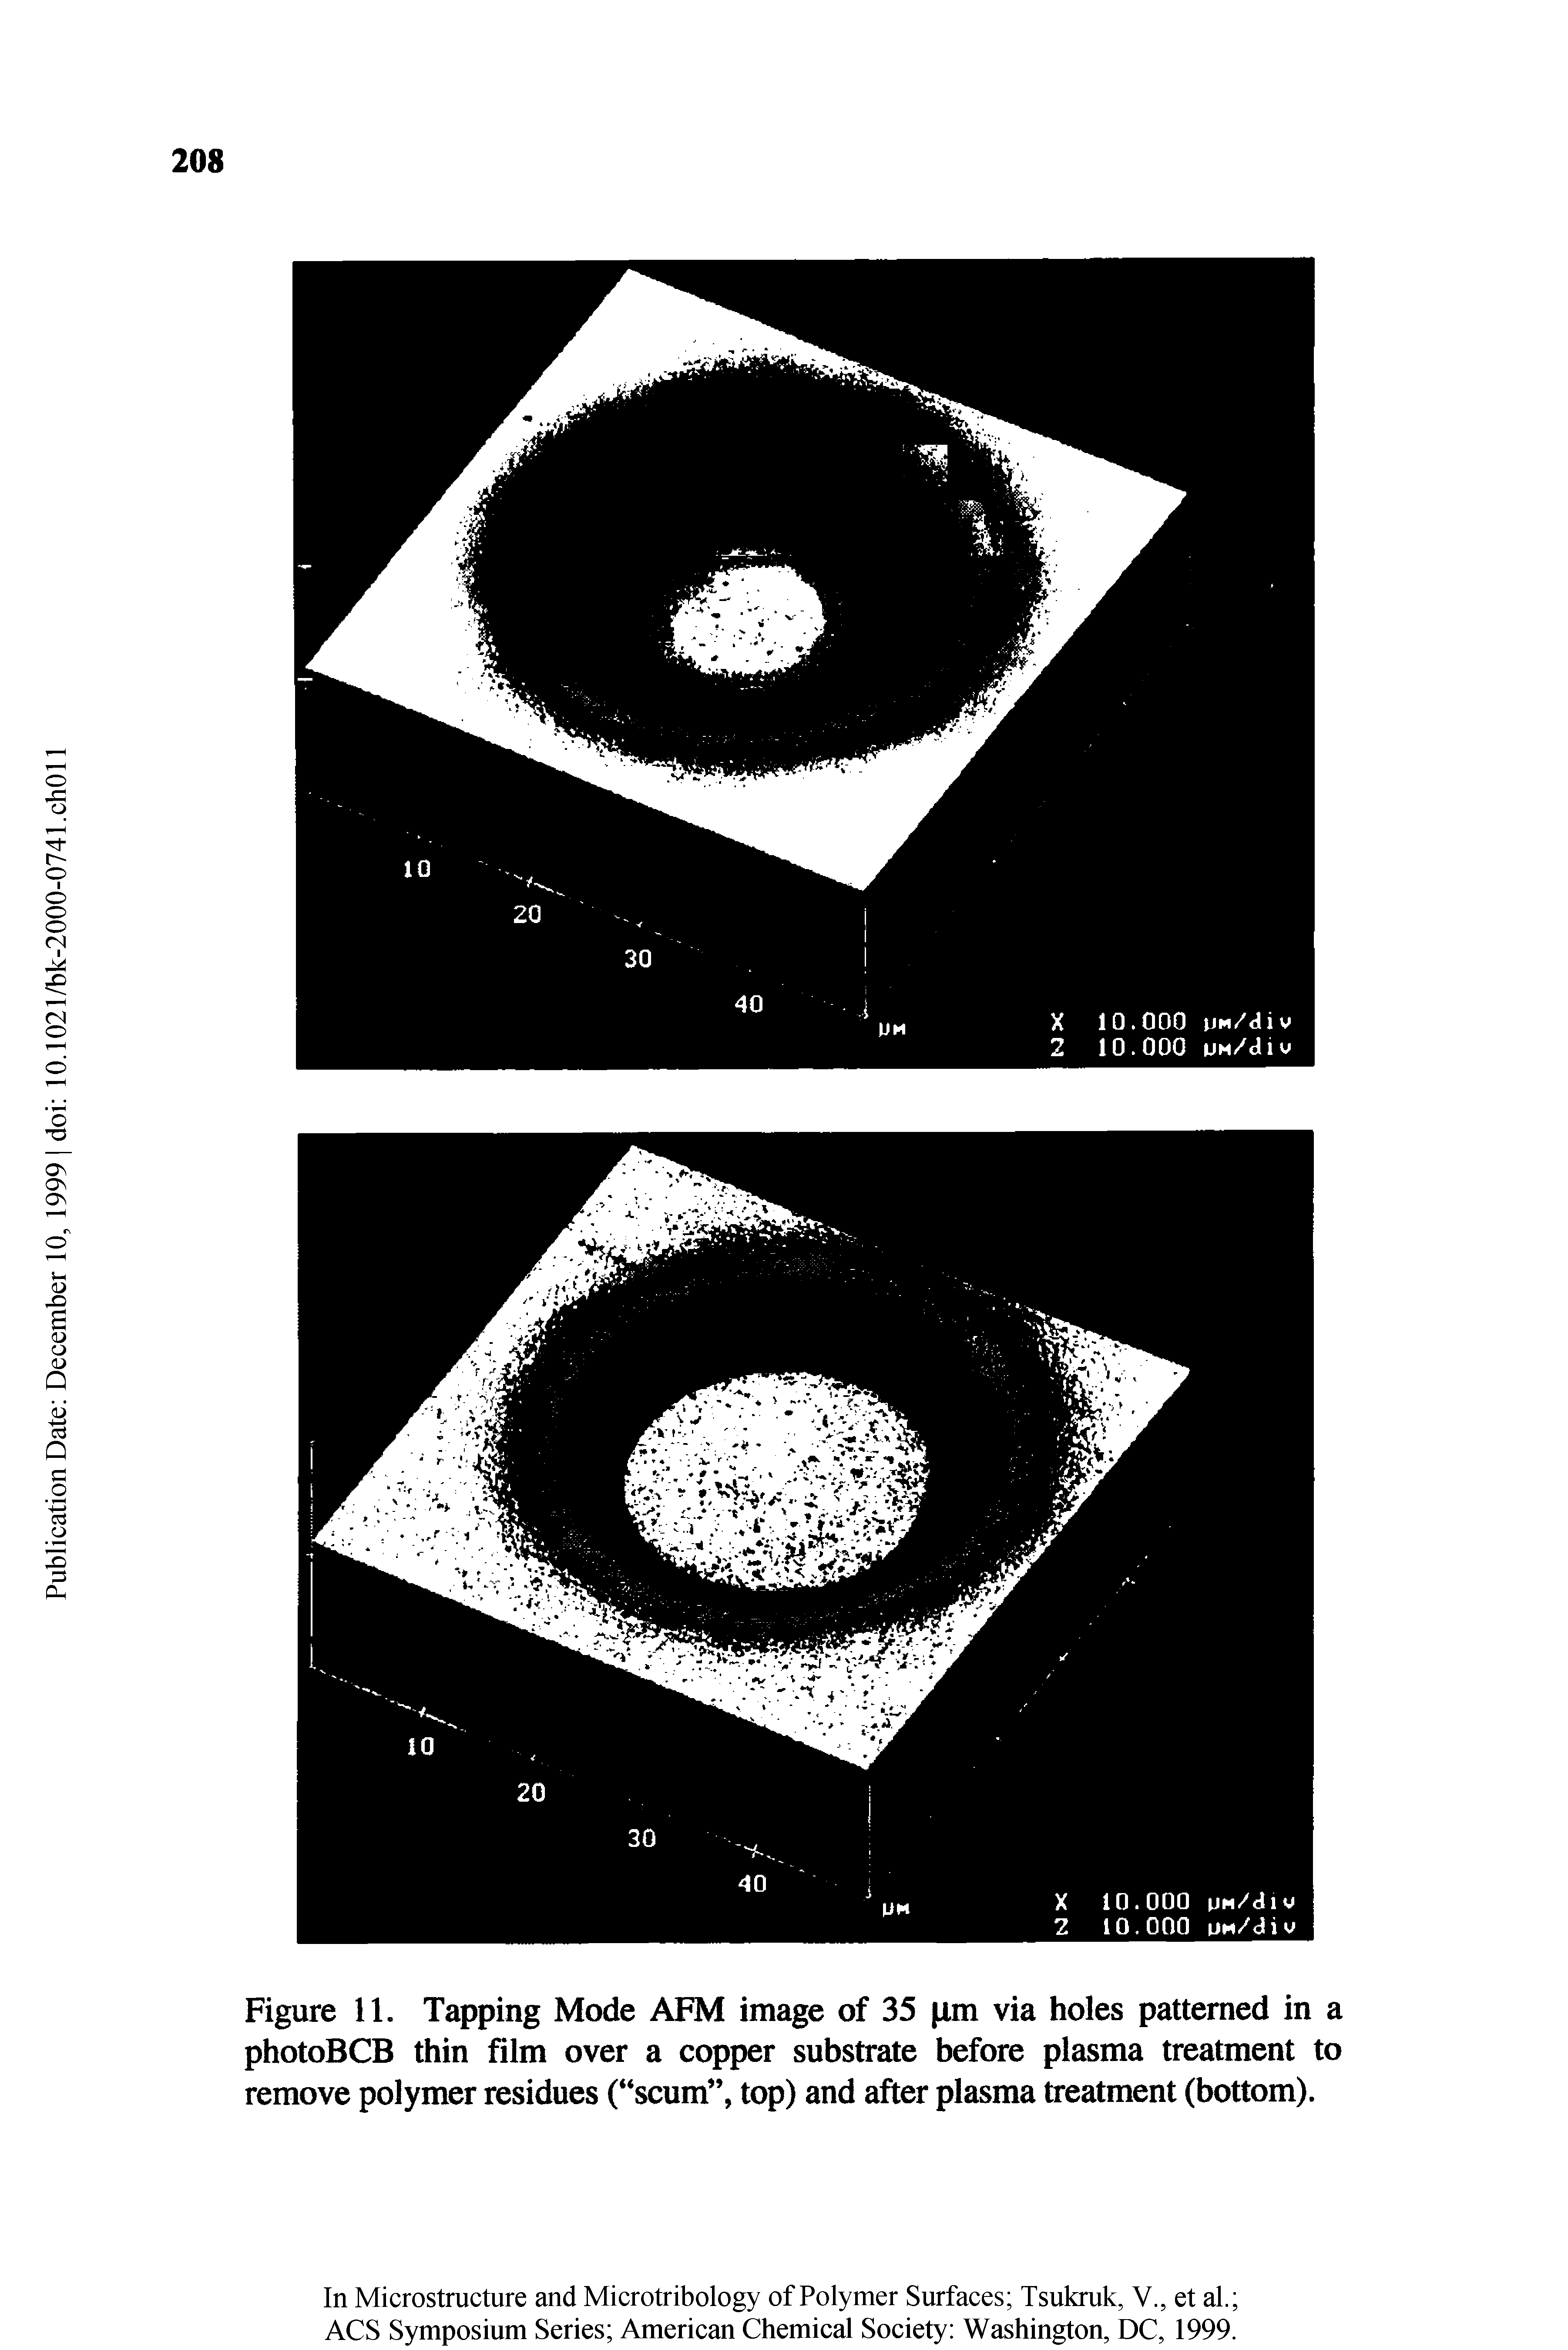 Figure 11. Tapping Mode AFM image of 35 pm via holes patterned in a photoBCB thin film over a copper substrate before plasma treatment to remove polymer residues ( scum , top) and after plasma treatment (bottom).